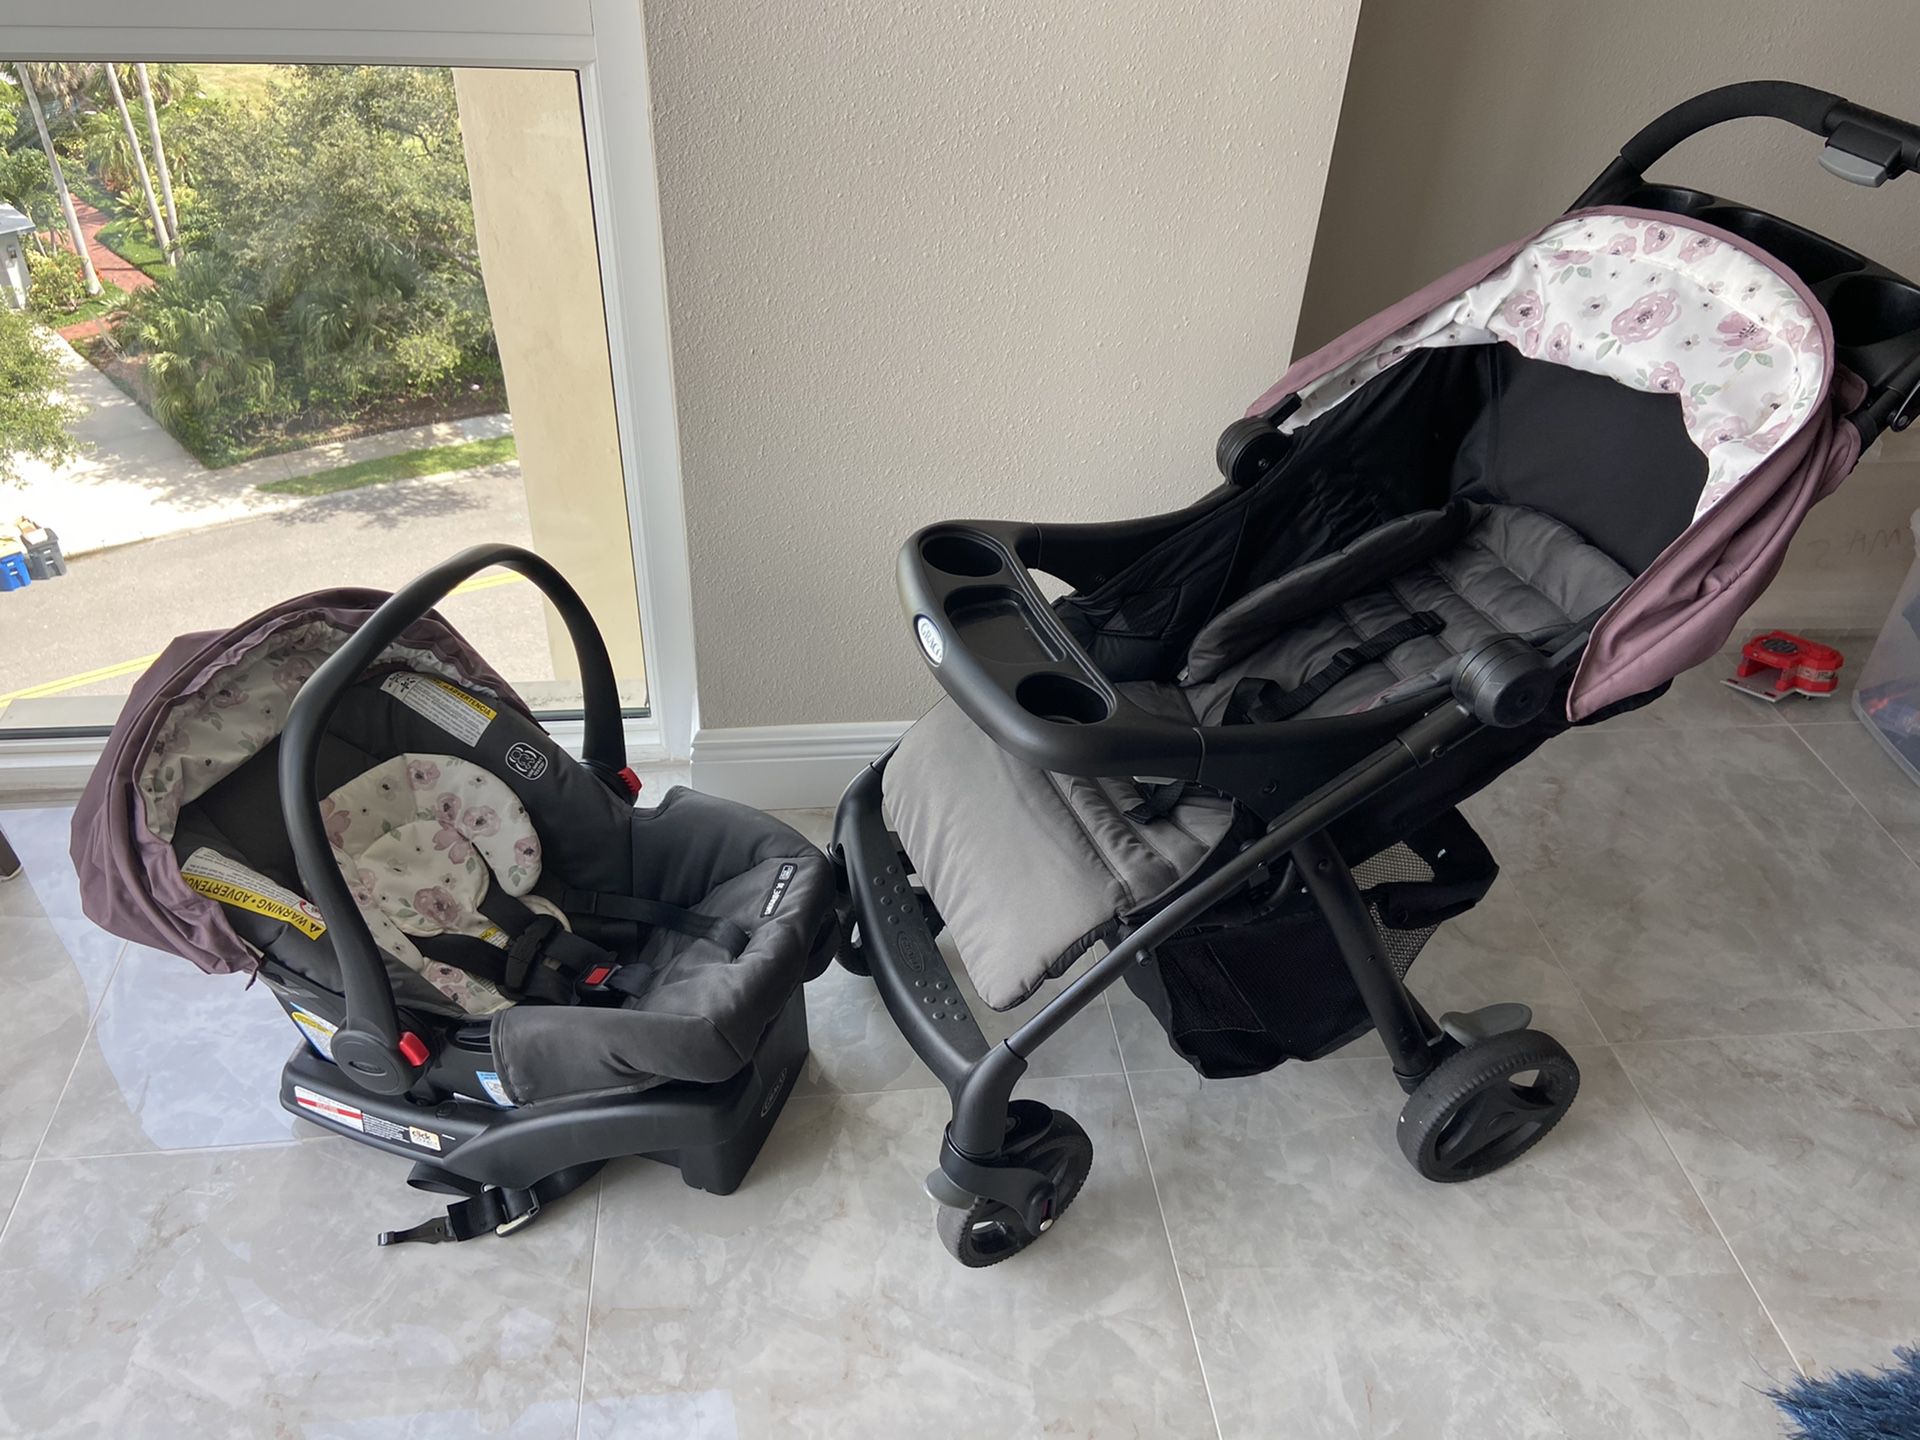 Girls Graco Travel System Click Connect Infant Car Seat, Stroller and Base